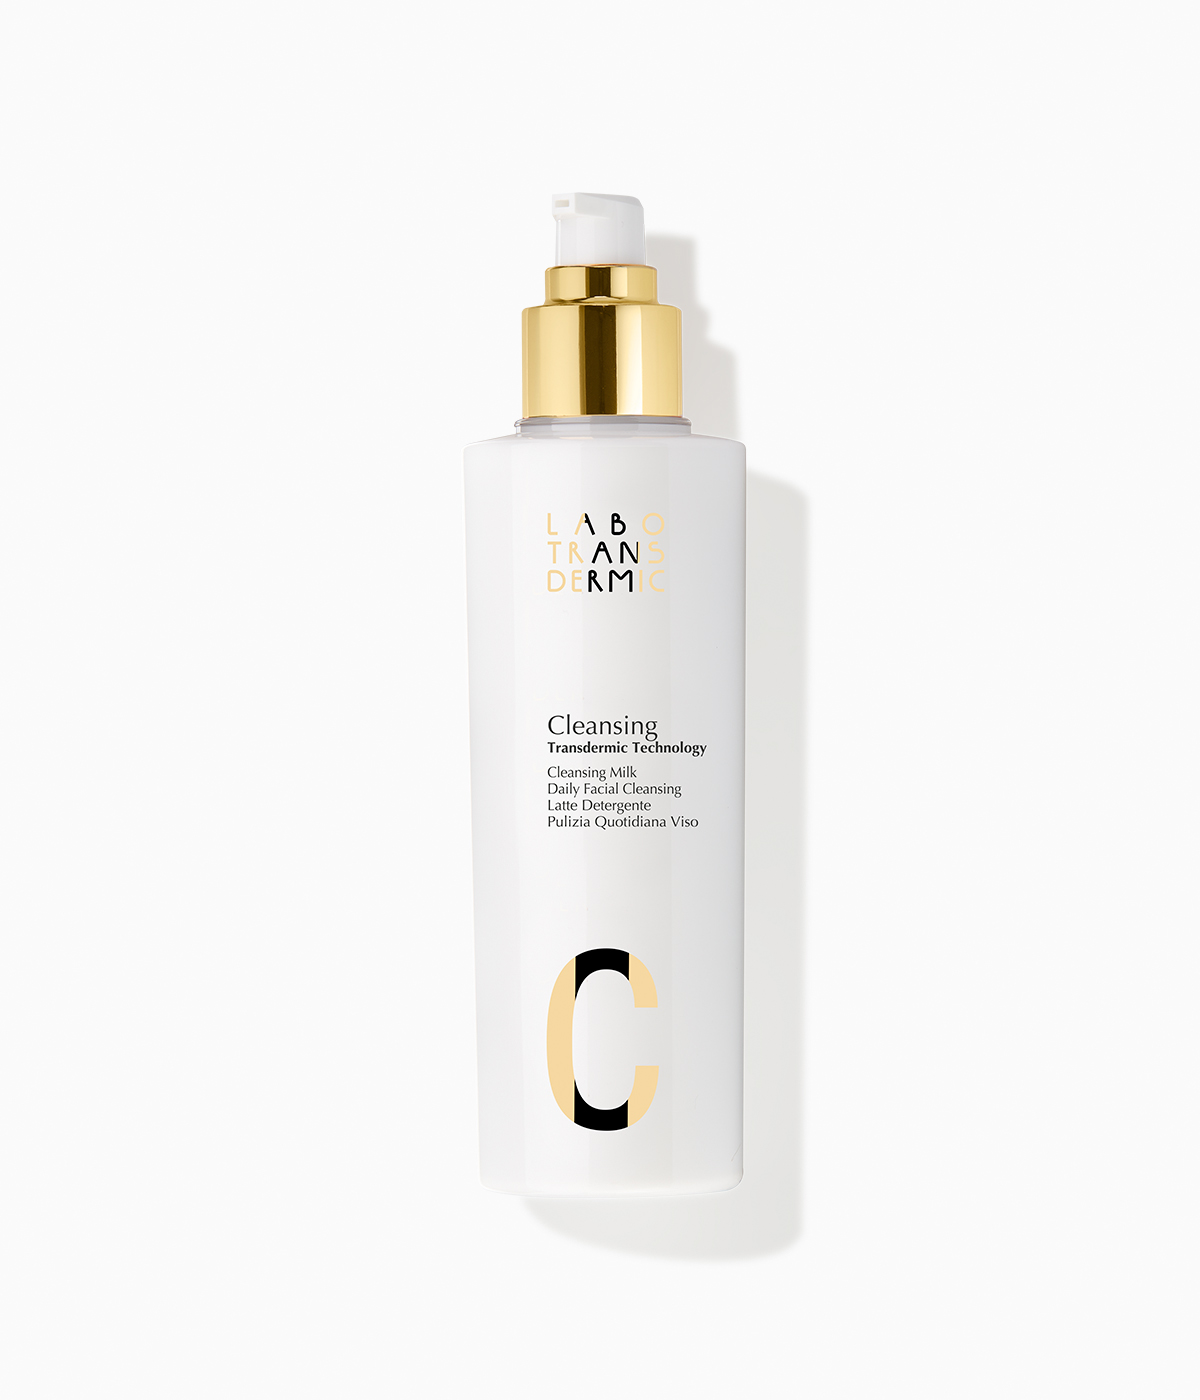 Labo Transdermic C Cleansing Gentle Rinse-Off Cleanser